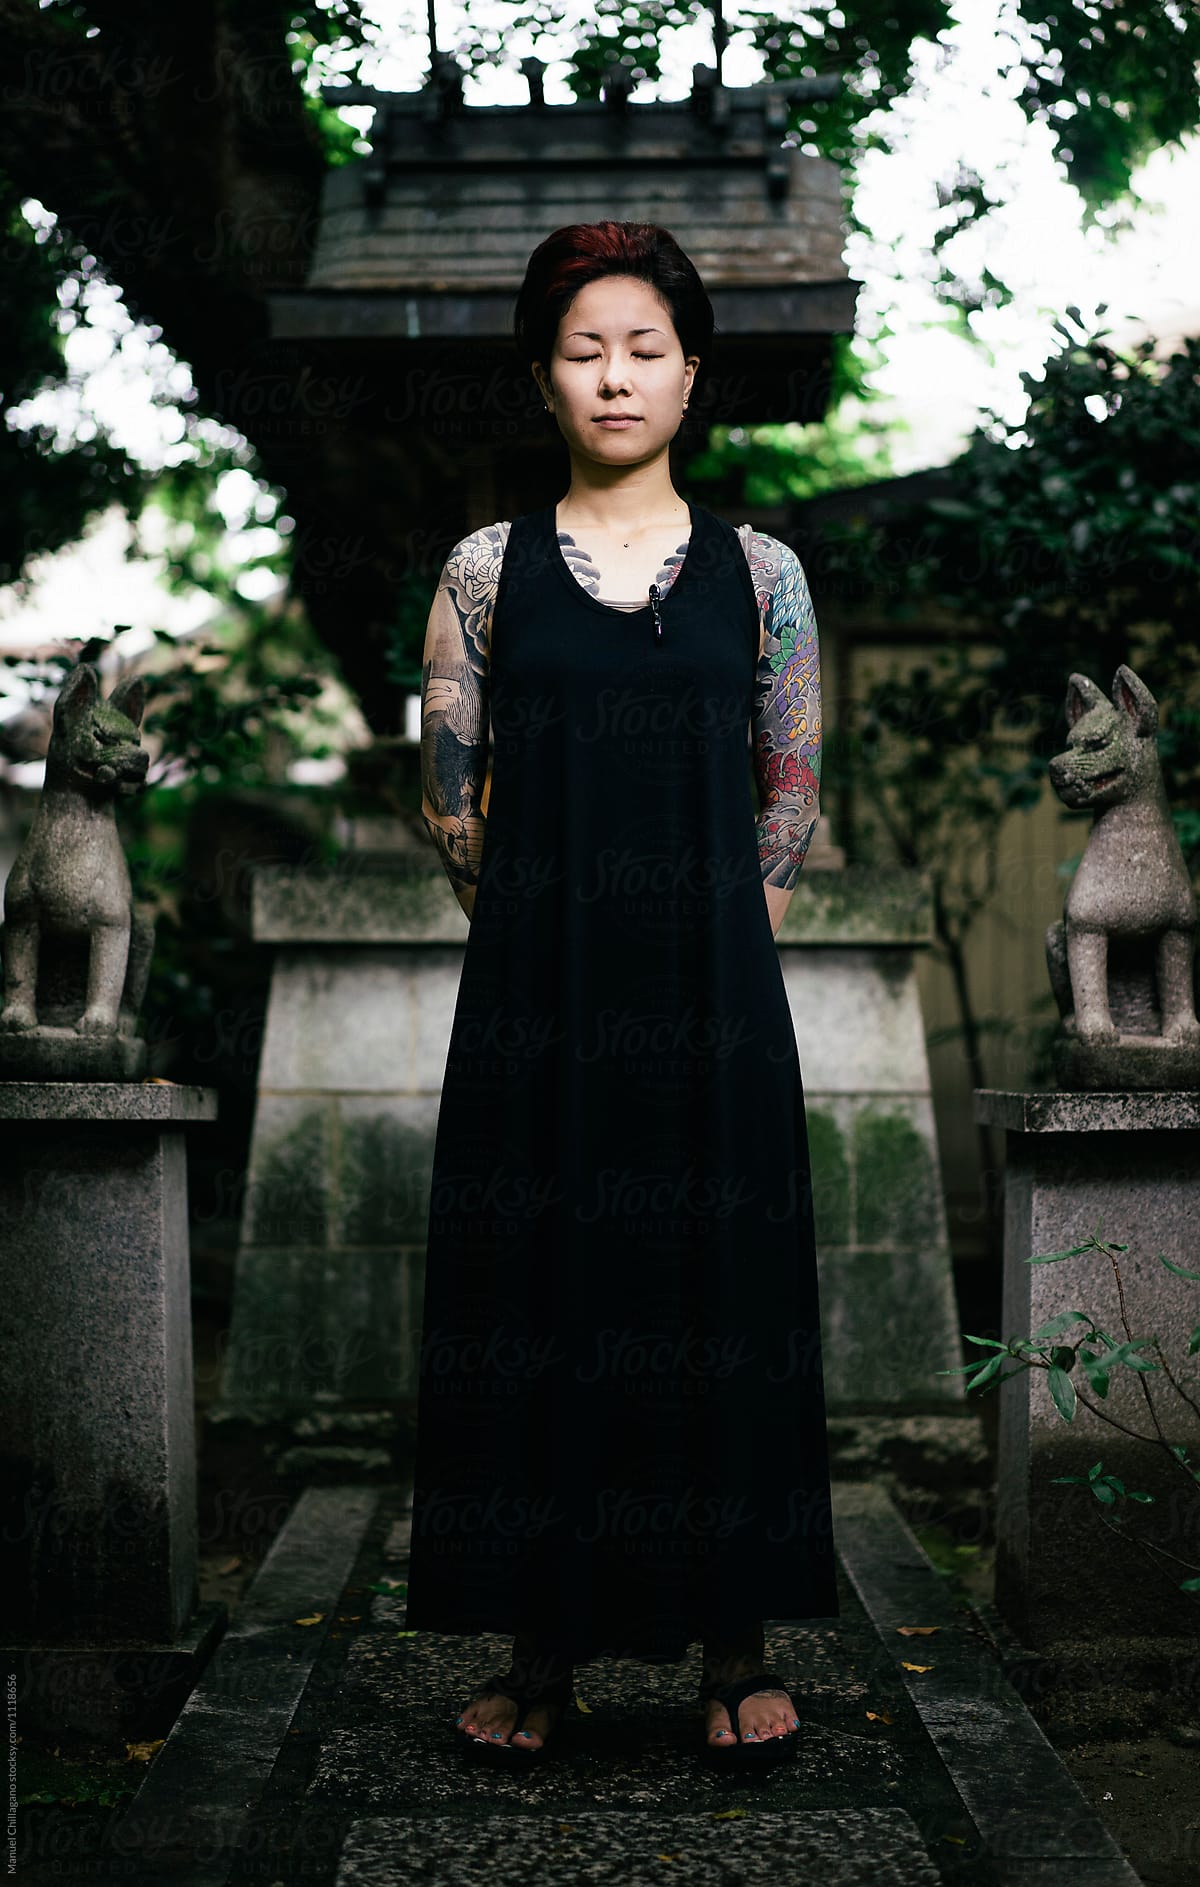 Tattooed Japanese Women Deeply Absorbed In Thought While Visiting